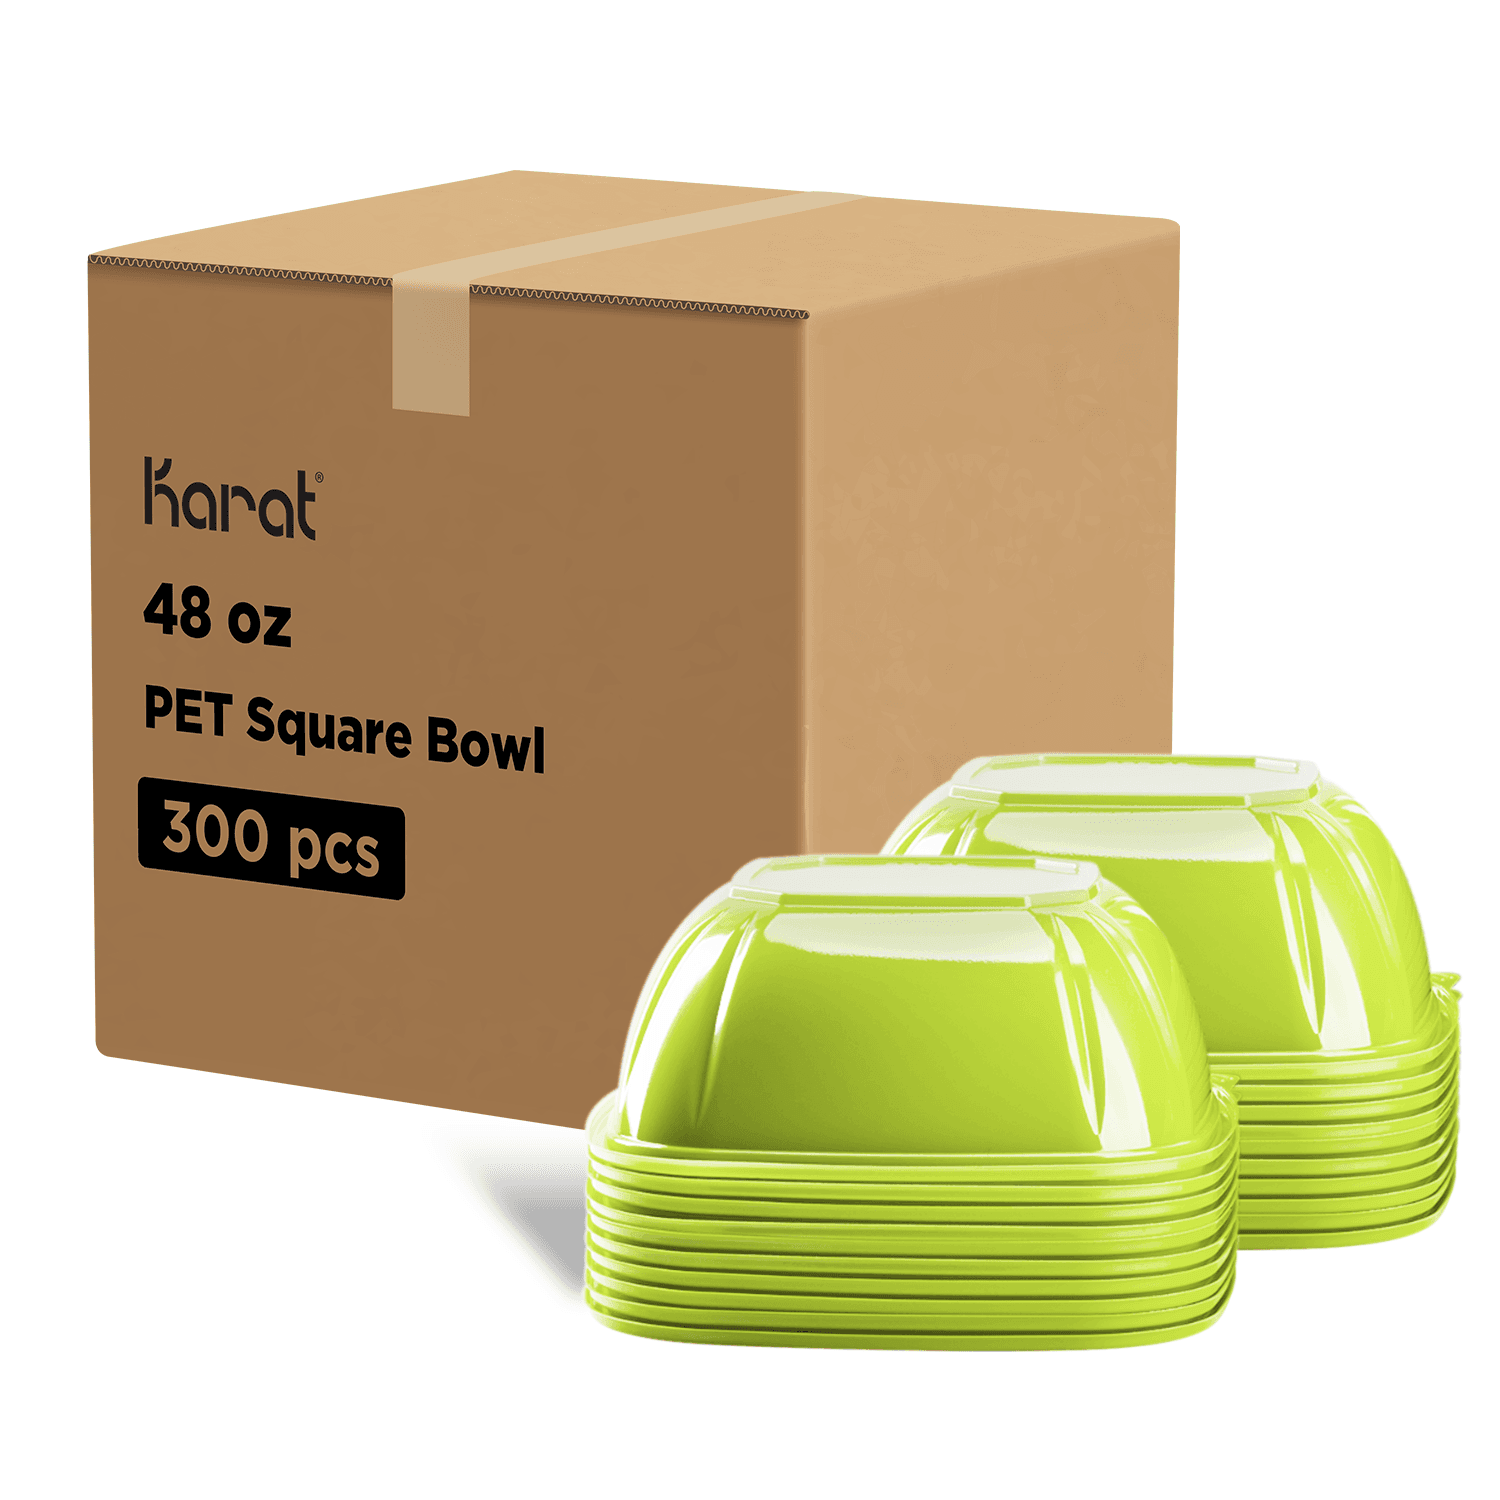 Green Karat 48oz PET Square Bowl stacked with packaging